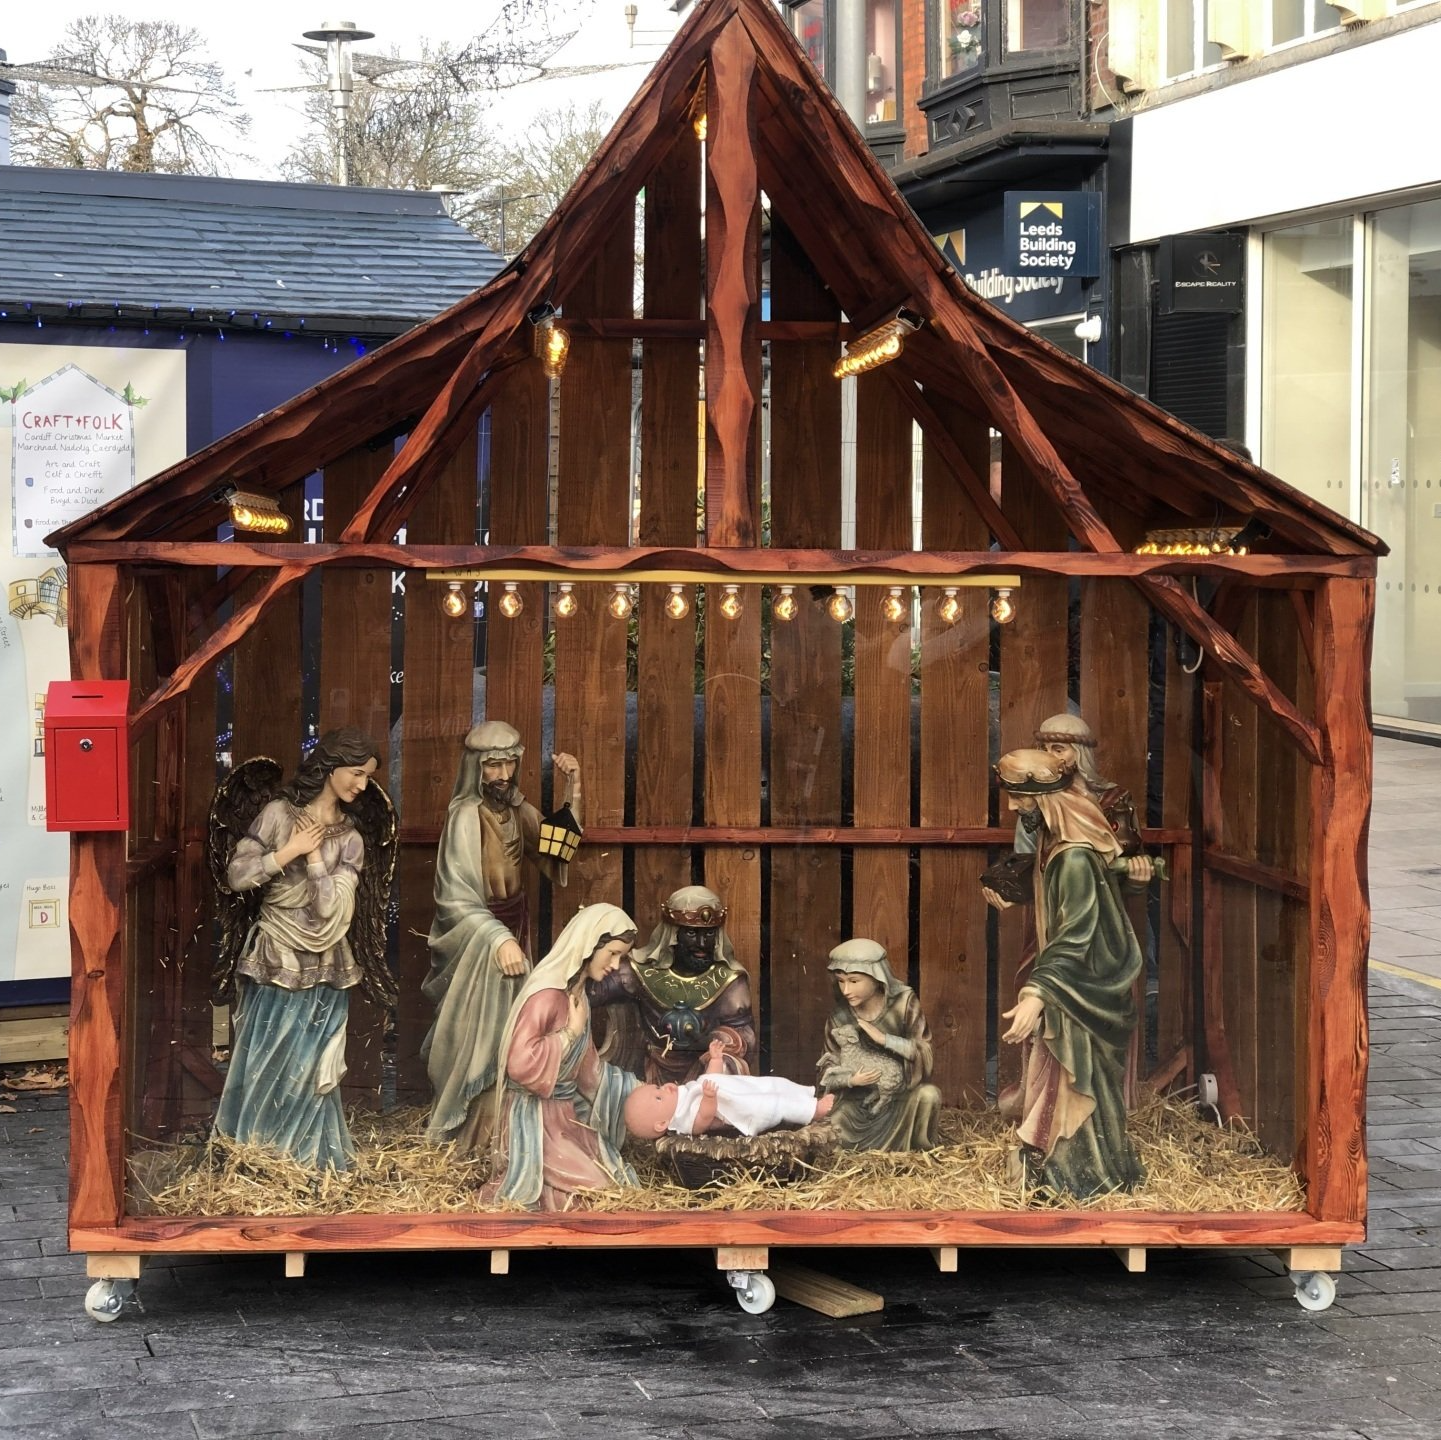 Bespoke Nativity scene designed by use and installed in Cardiff City